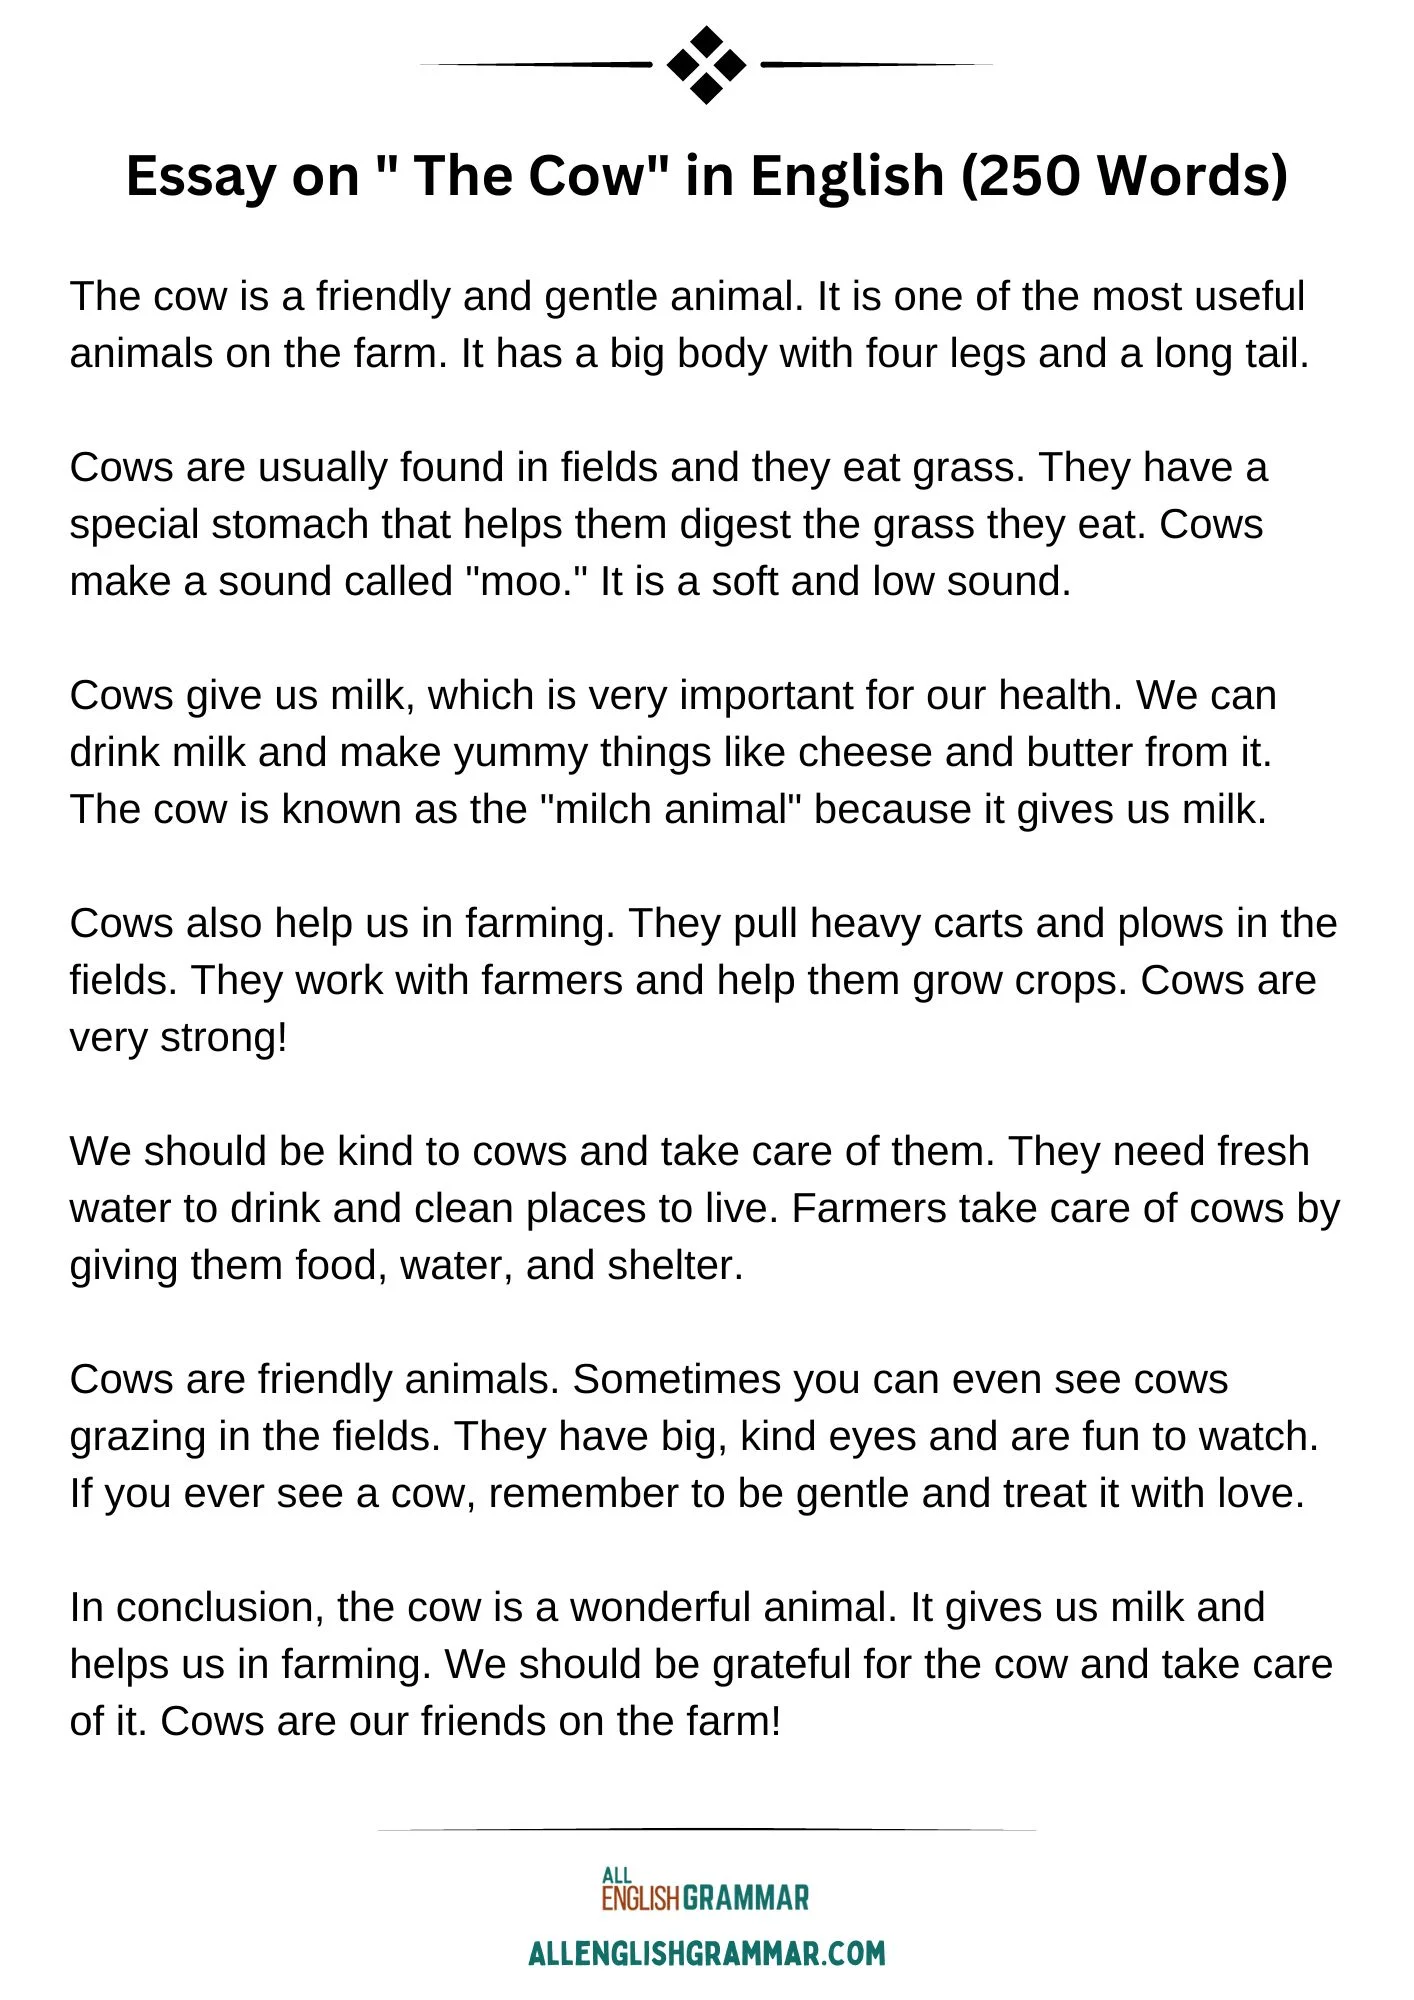 Cow Essay in English for Class 5 to 8 (250 words)